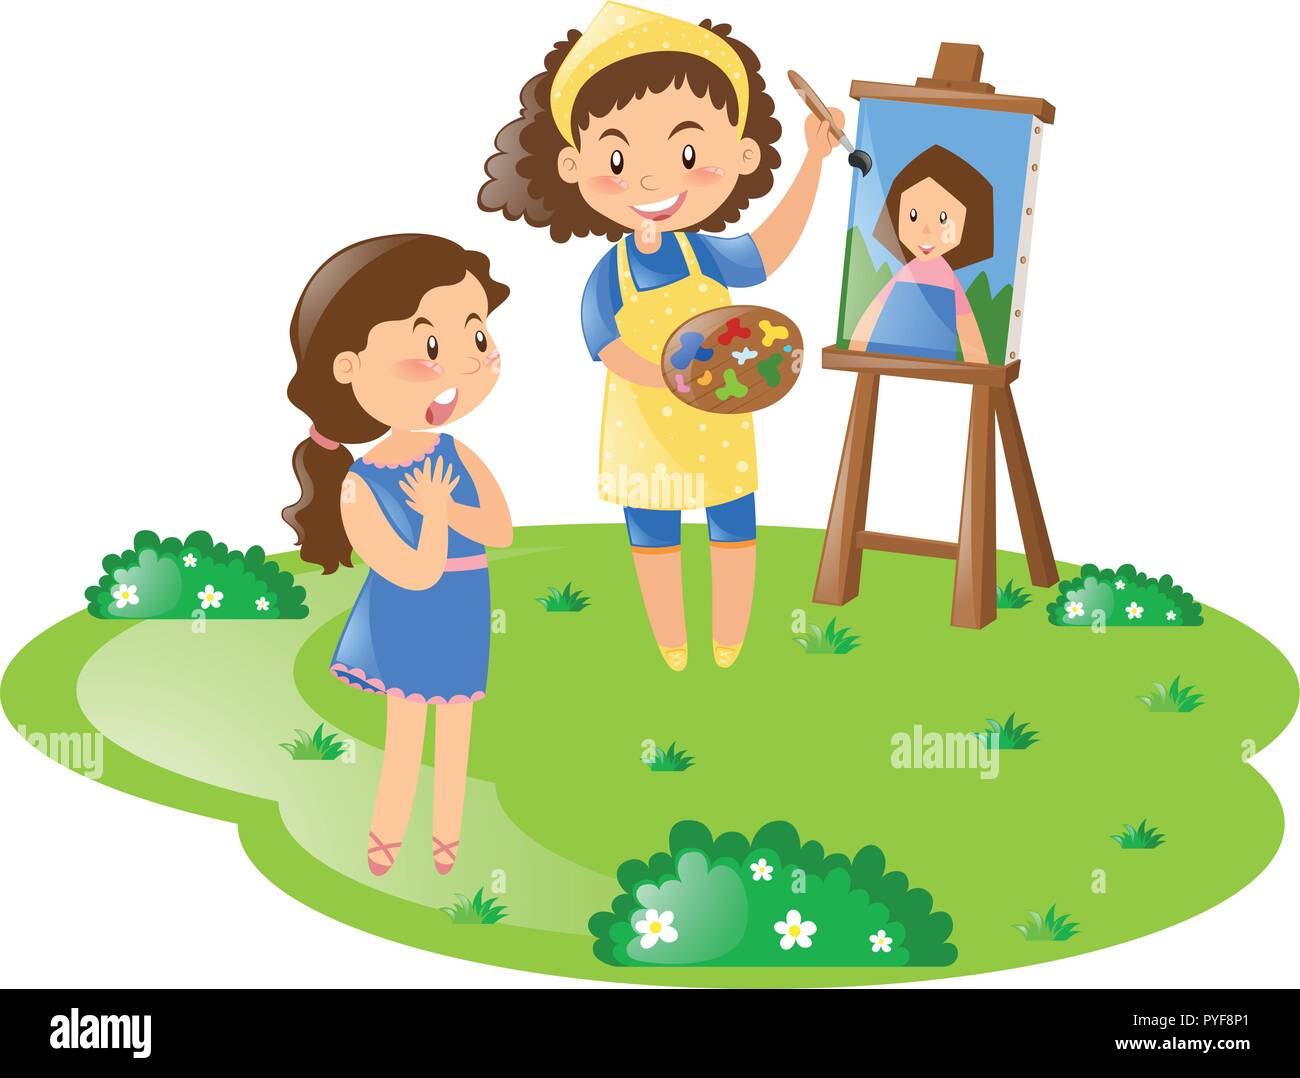 Woman painting on canvas illustration Stock Vector